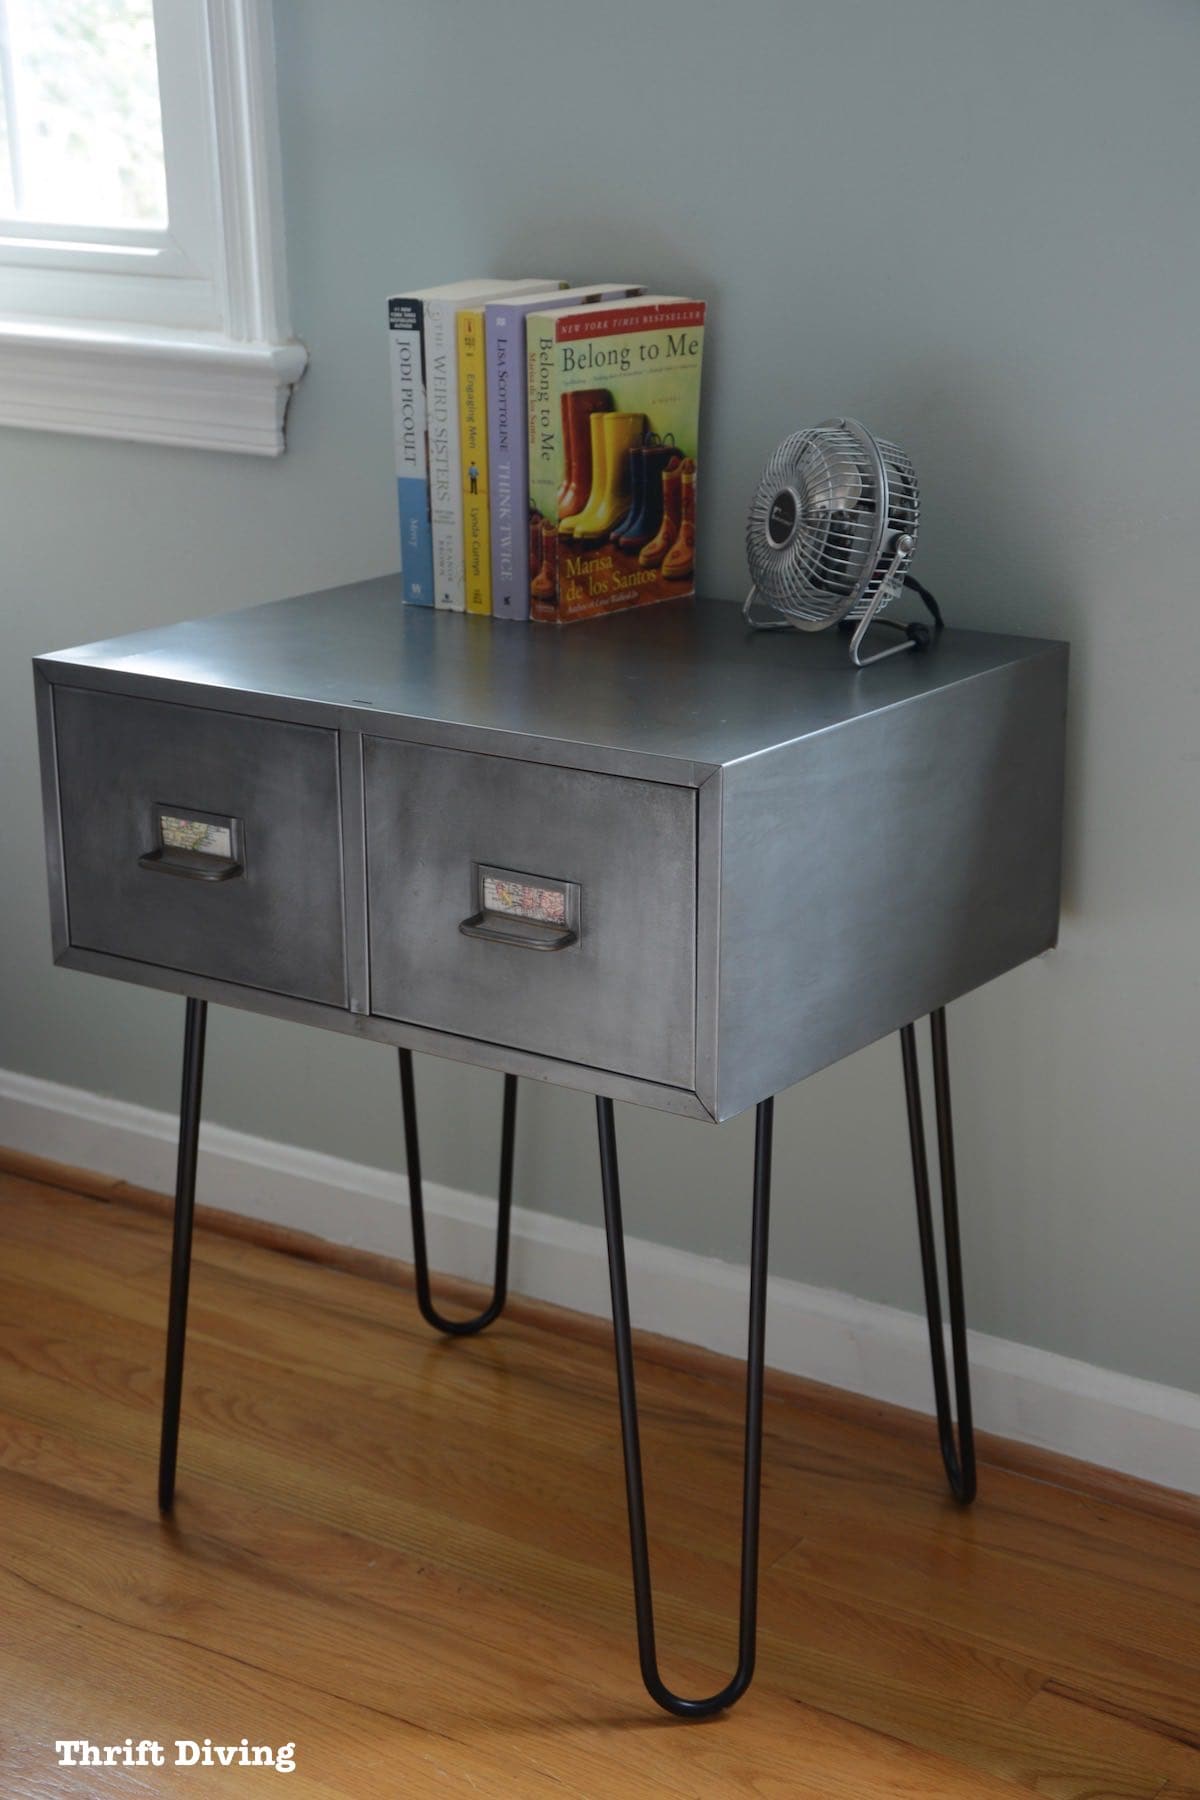 Dip and Strip - Metal cabinets with hairpin legs. - Thrift Diving